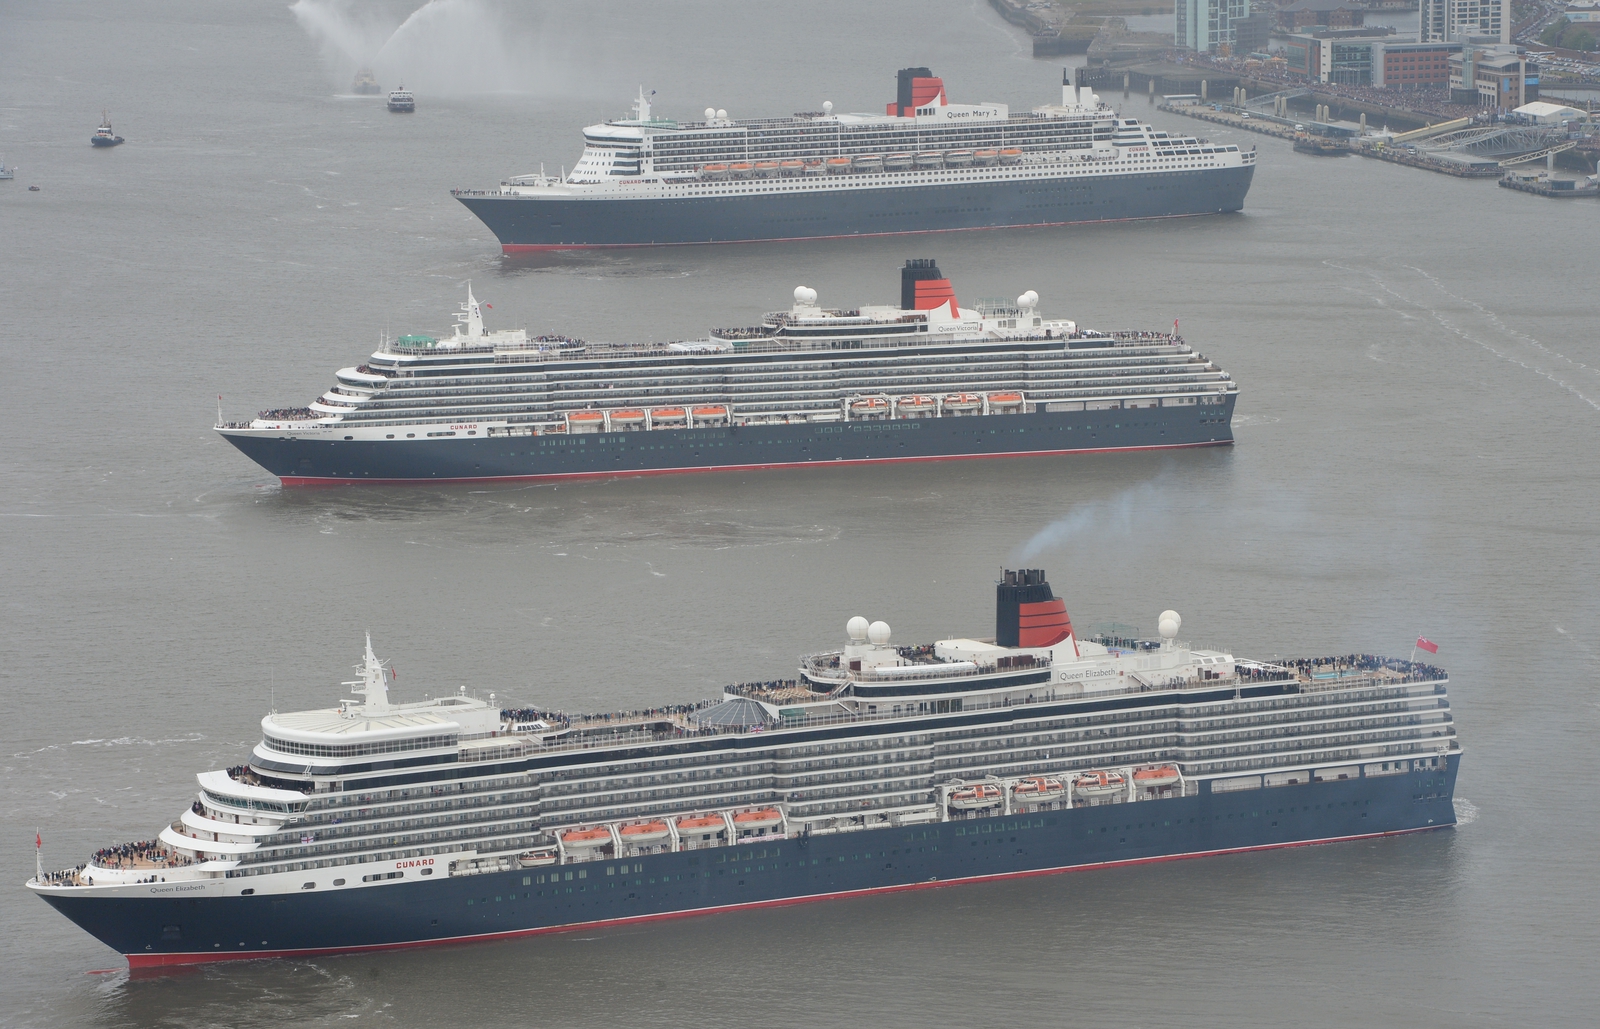 Leaked audio reveals that crew members on Cunard Cruise 